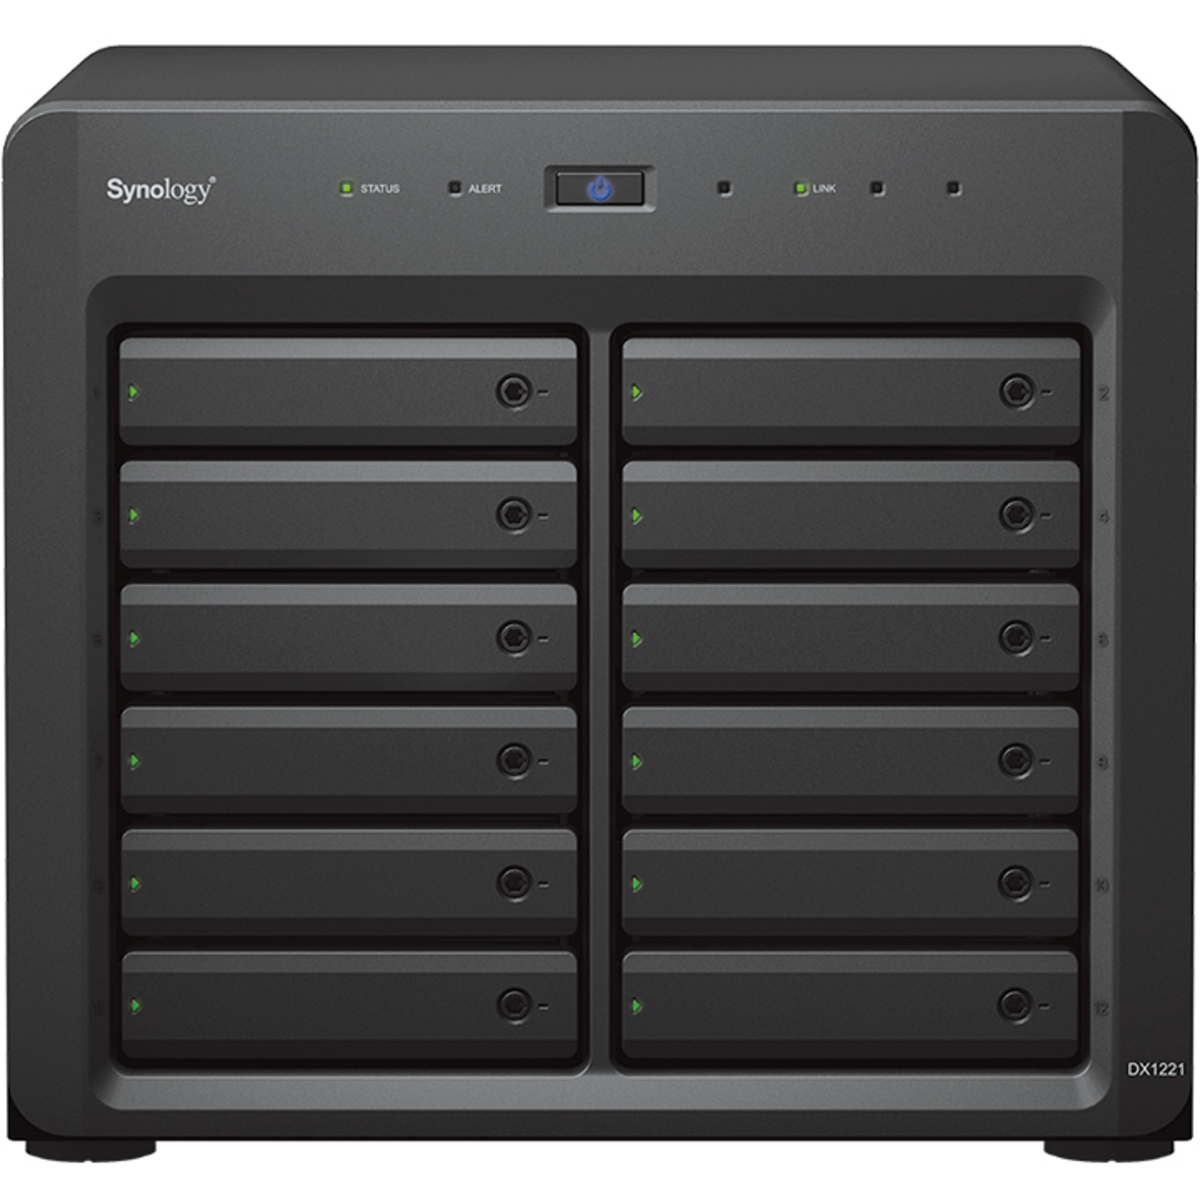 Synology DX1222 External Expansion Drive 96tb 12-Bay Desktop Multimedia / Power User / Business Expansion Enclosure 12x8tb Western Digital Red Pro WD8005FFBX 3.5 7200rpm SATA 6Gb/s HDD NAS Class Drives Installed - Burn-In Tested DX1222 External Expansion Drive